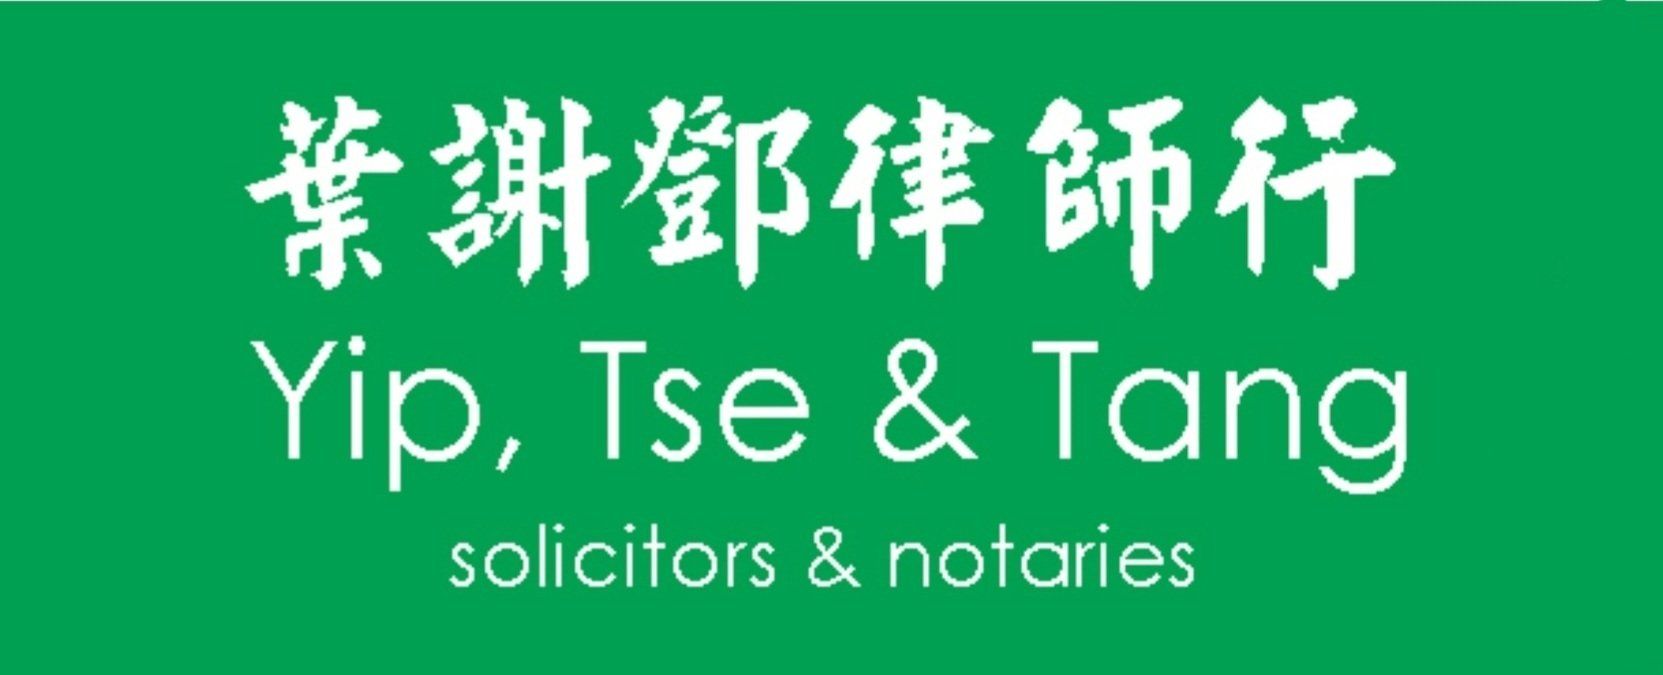 Yip Tse Tang law firm on Wills and EPOA